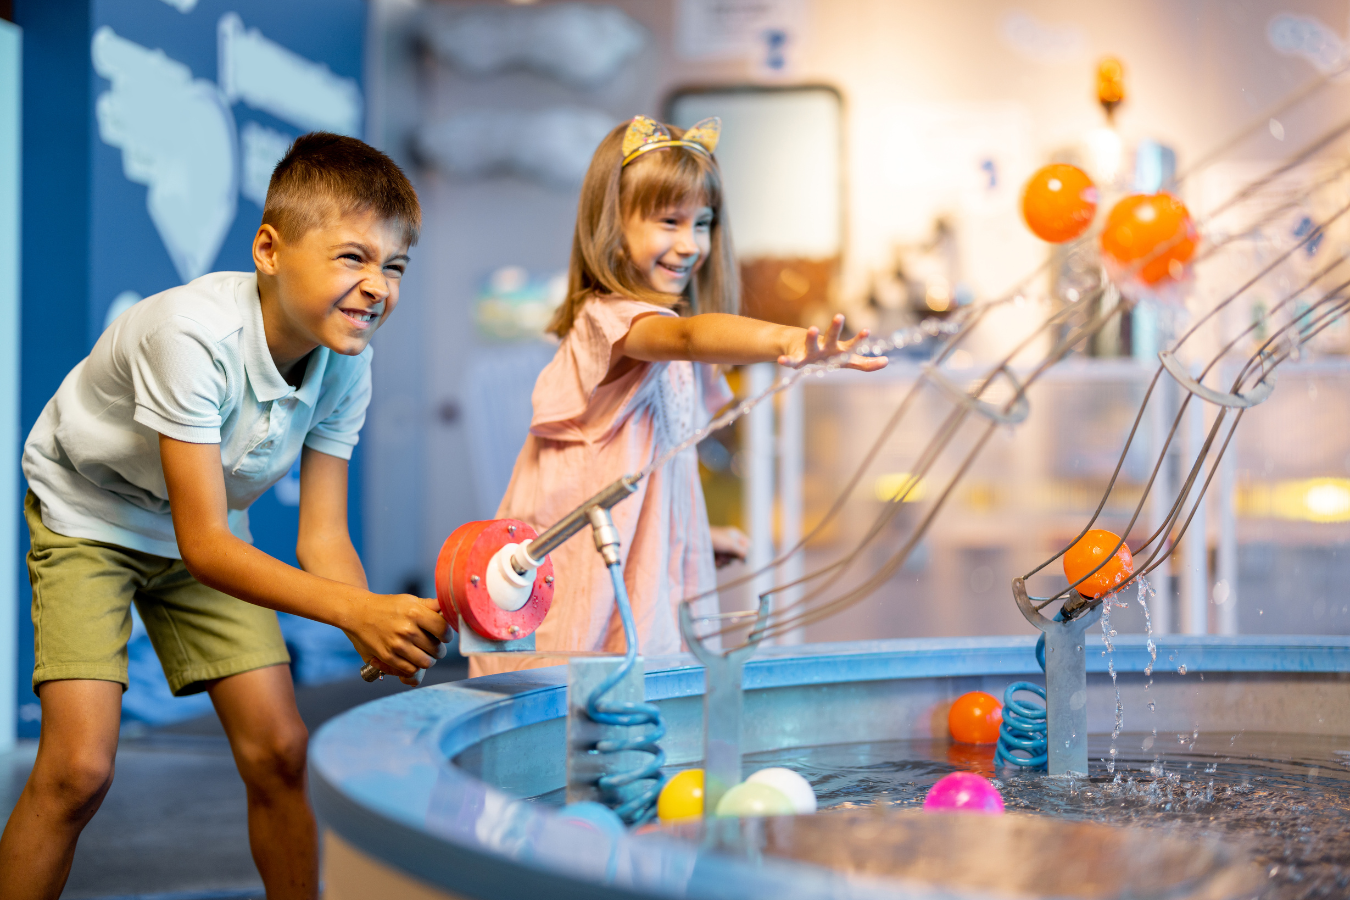 Two kids enjoy time playing in a science centre. Arts and culture organizations can thrive in a post-pandemic world through the integration of ERP software like Sparkrock 365.